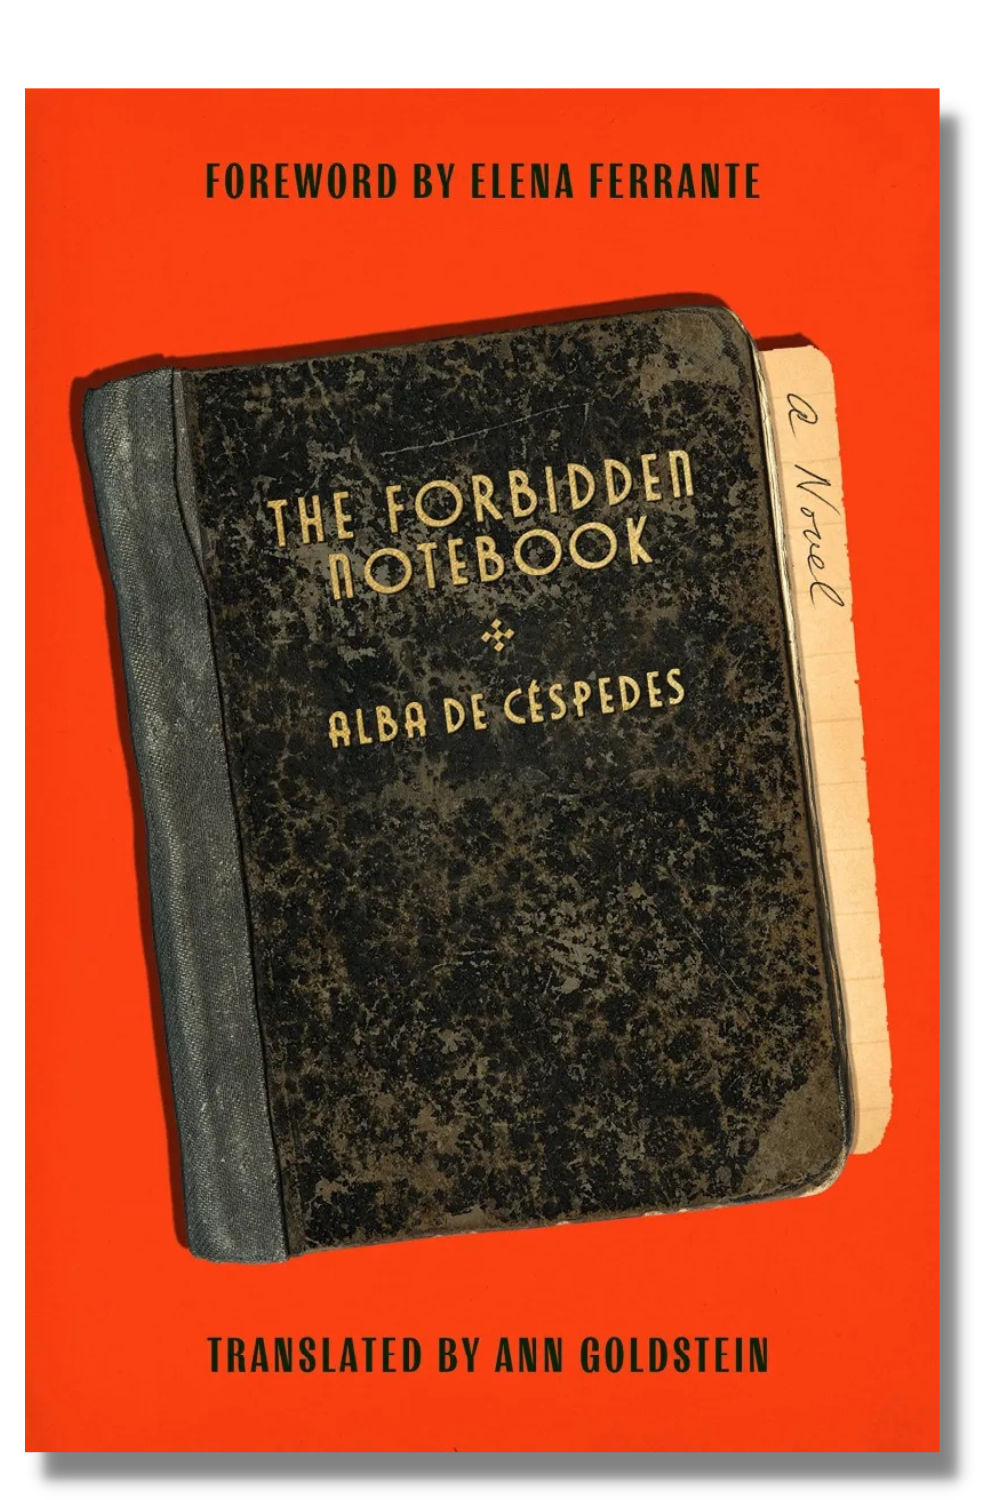 The cover of "The Forbidden Notebook"